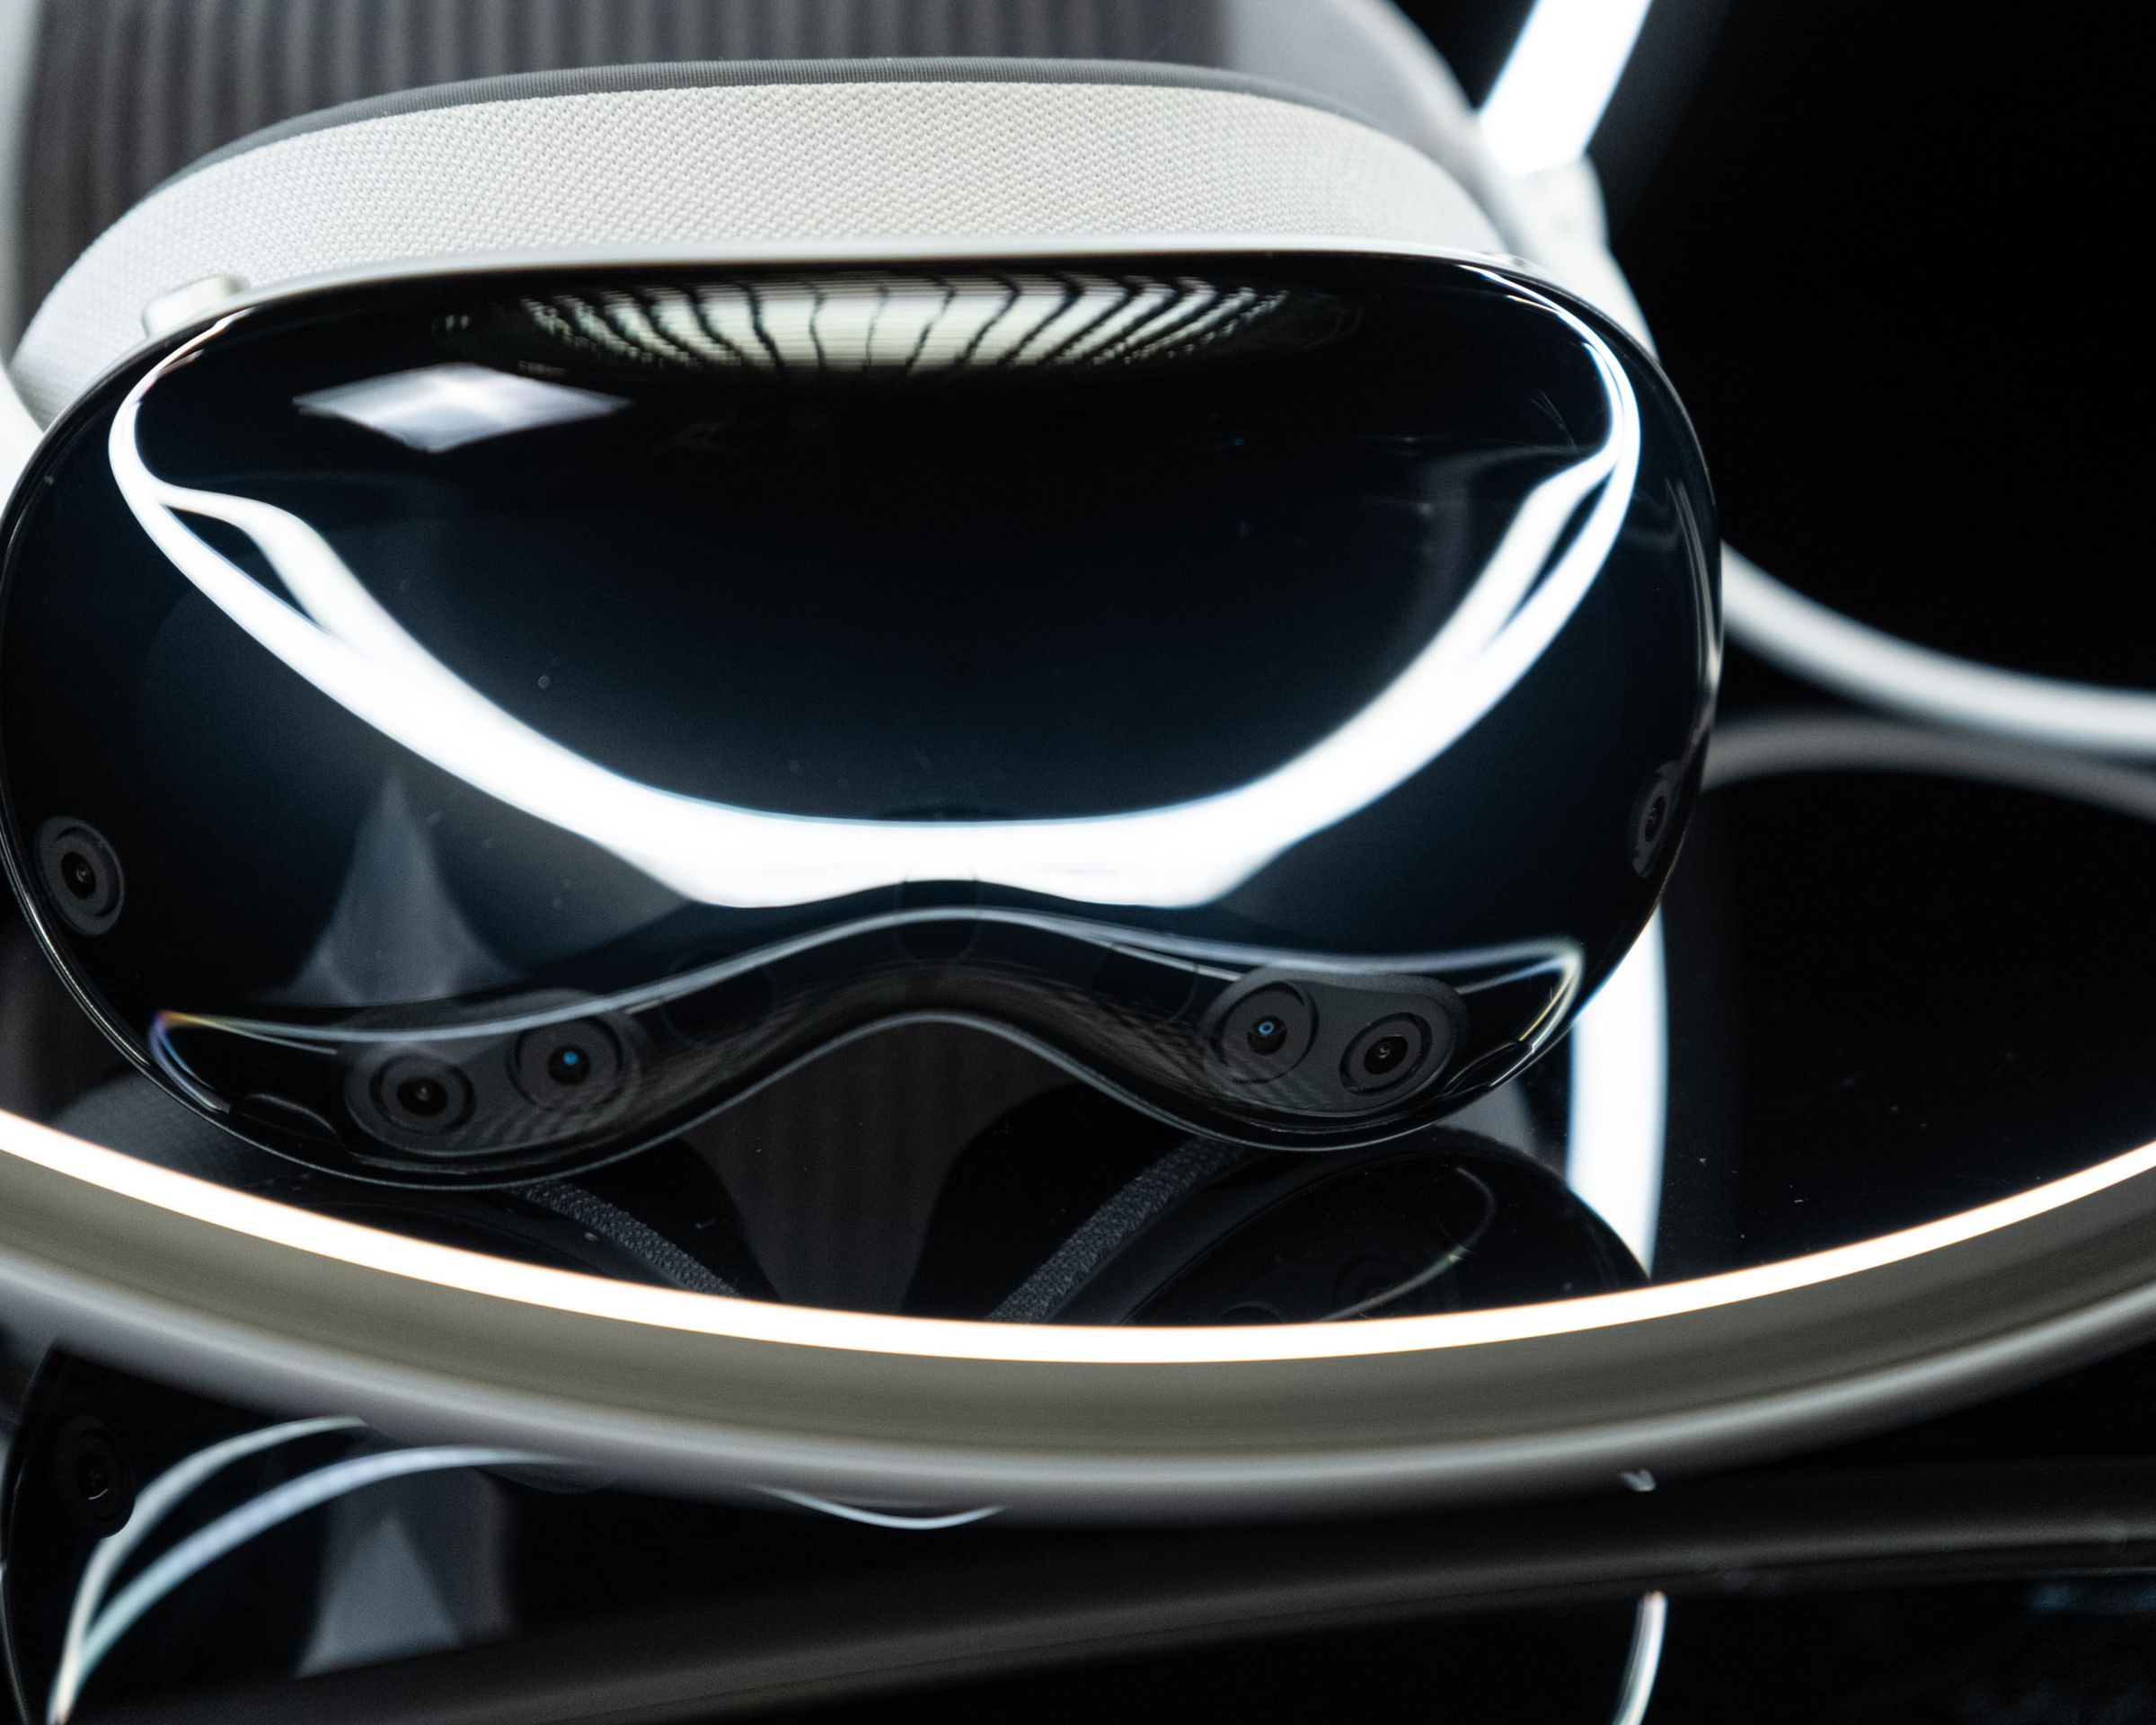 The Vision Pro headset, photographed so that you can see the cameras on the front.